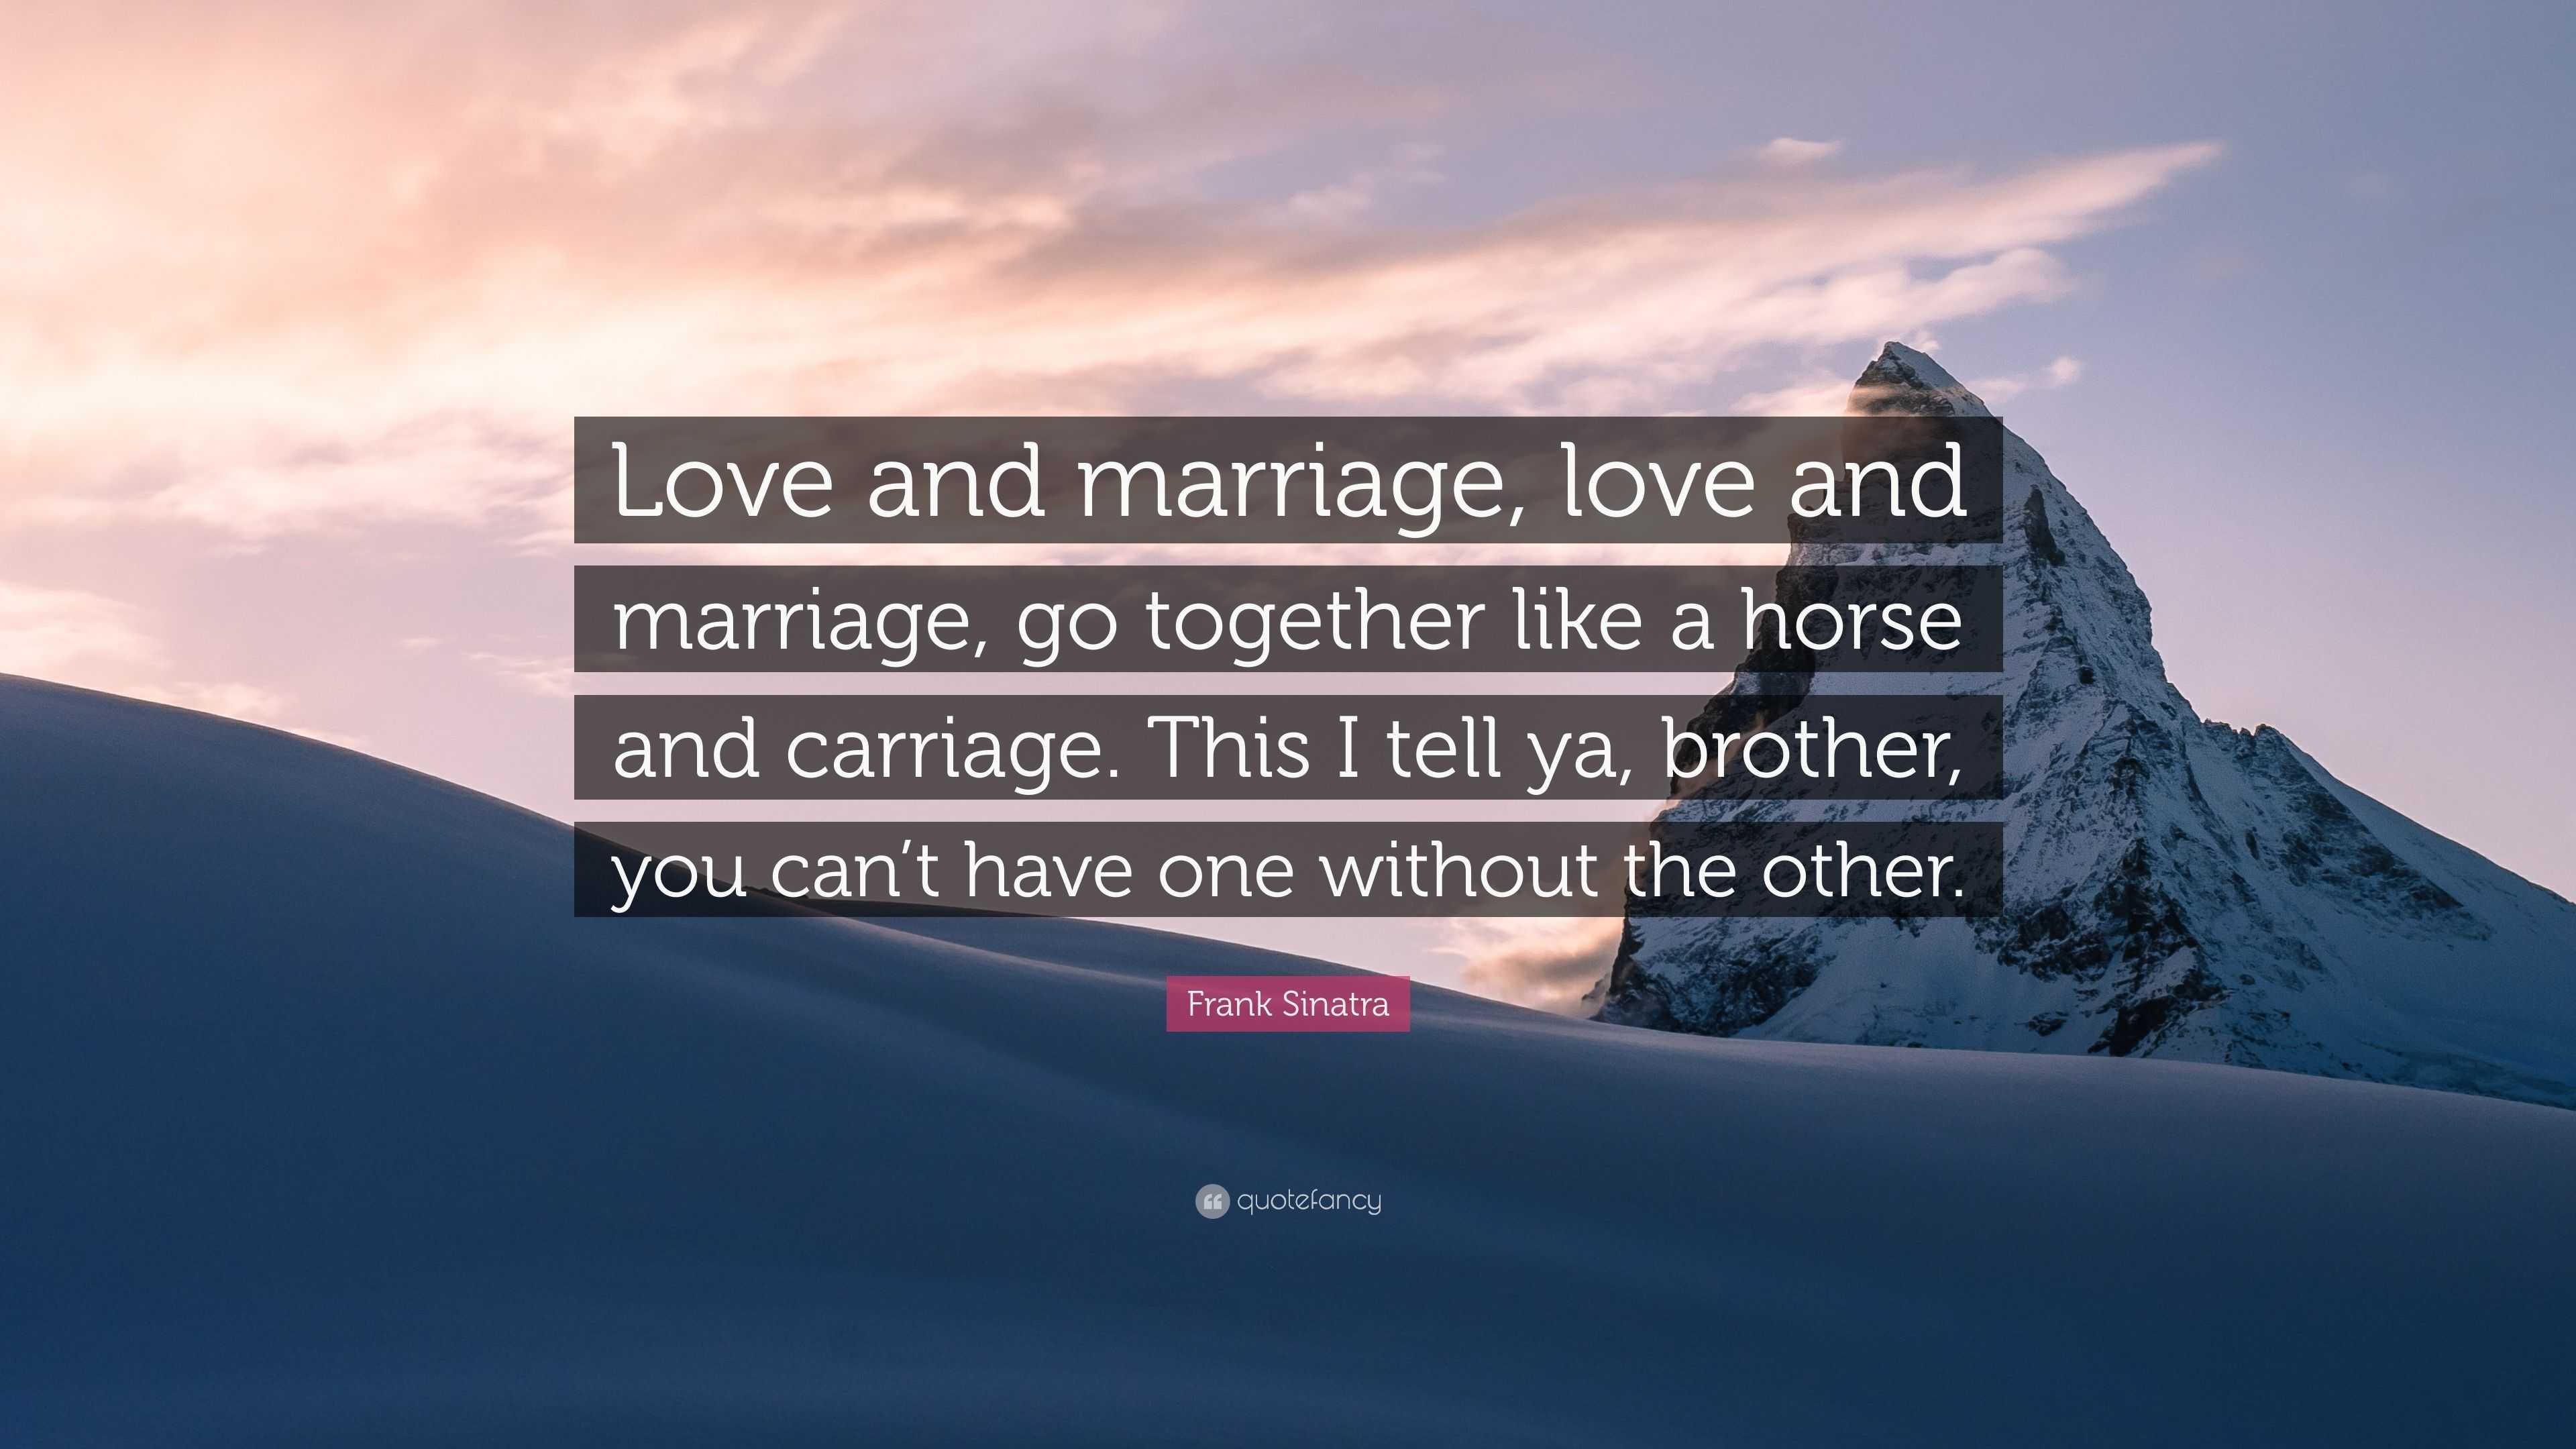 Frank Sinatra Quote: “Love and marriage, love and marriage, go together - Love And Marriage Go Together Like A Horse And Carriage